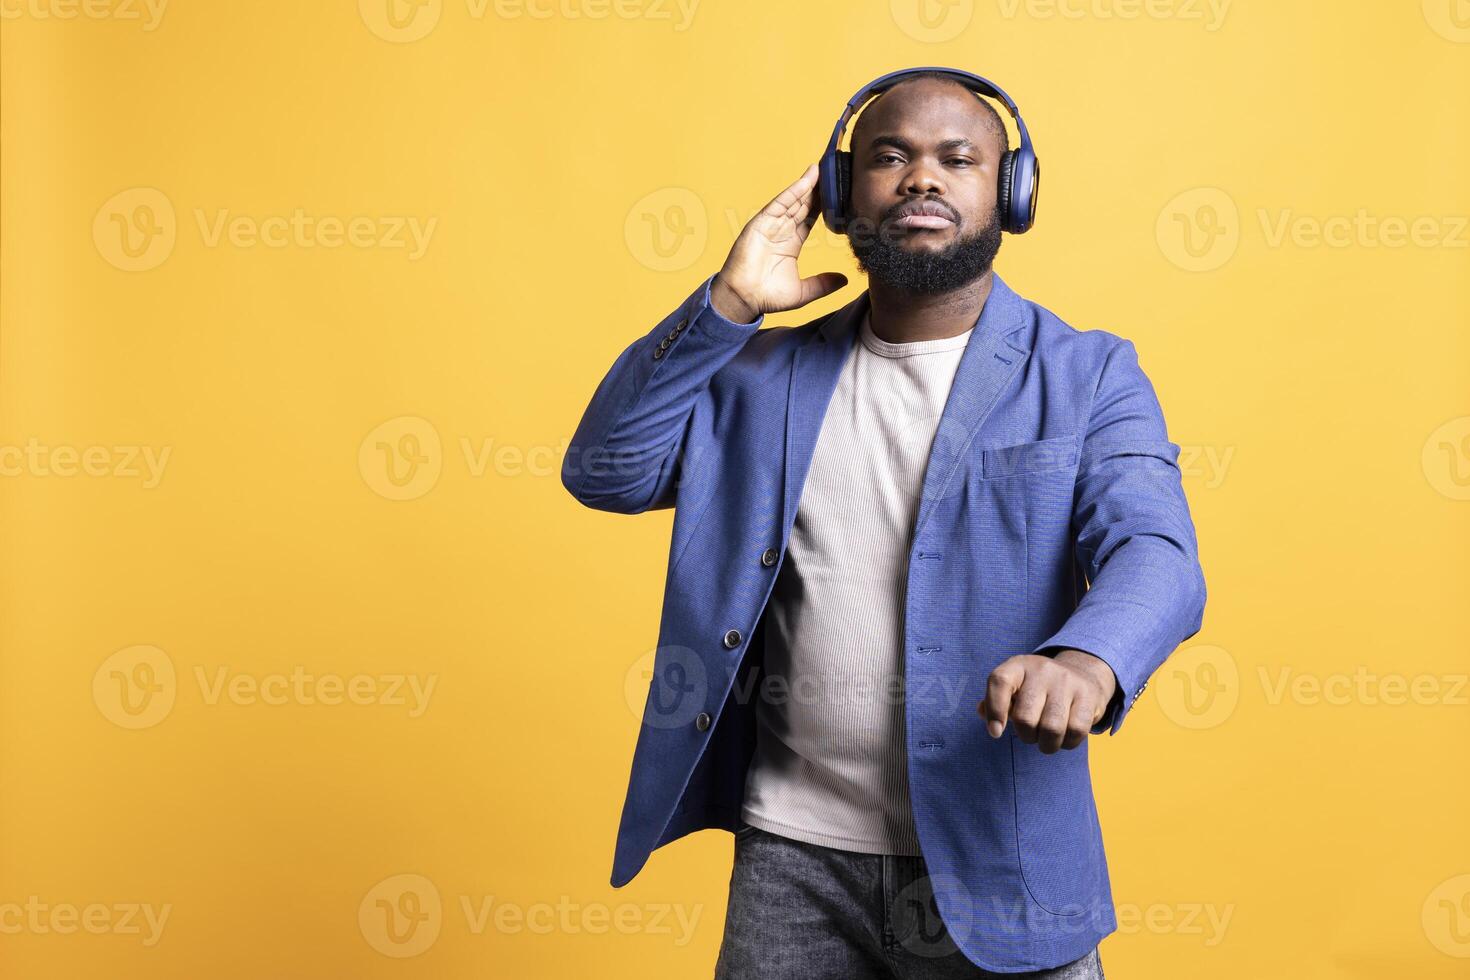 African american man listening to music on wireless stereo headphones during time off. BIPOC audiophile enjoying songs on high fidelity earphones, isolated over studio background photo